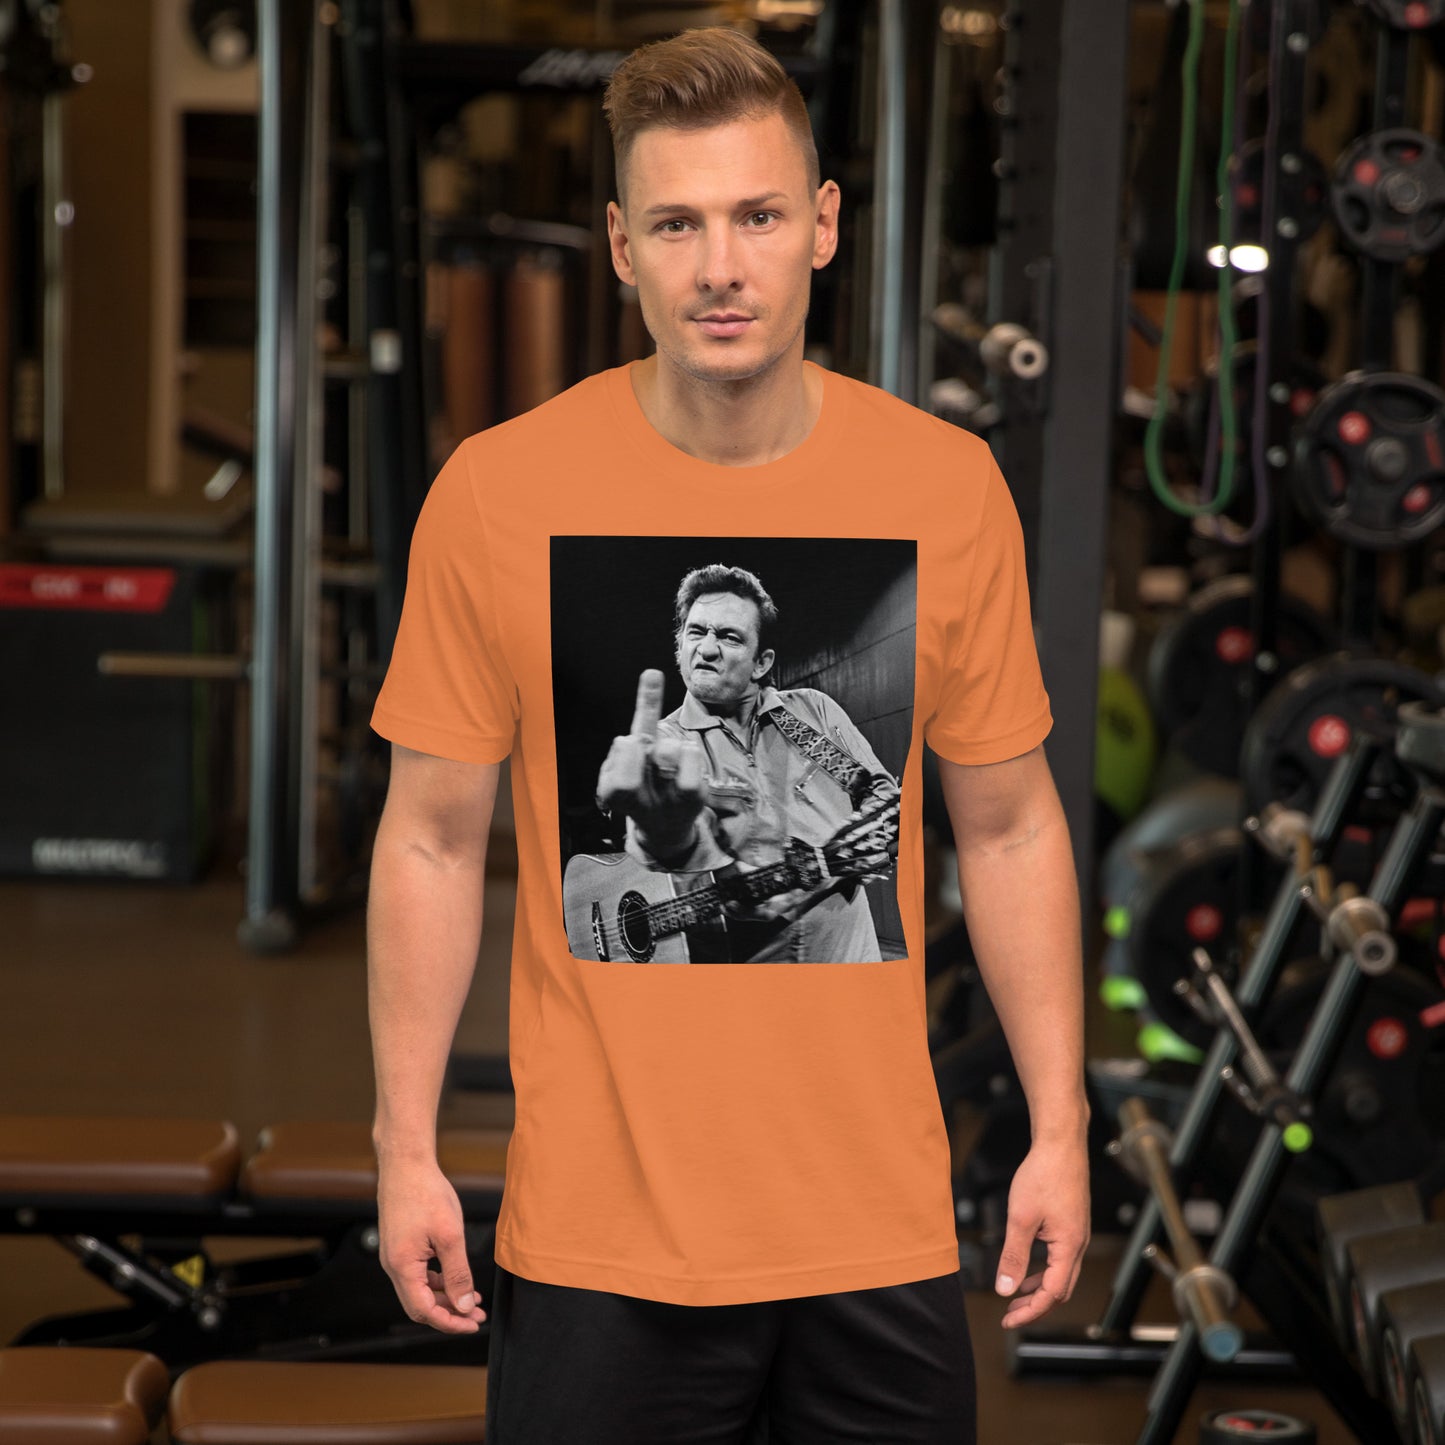 Finger - Get Your Twang On with Classic Country Tees - The Ultimate Unisex T-Shirt for True Country Souls! - Classic Country Tees